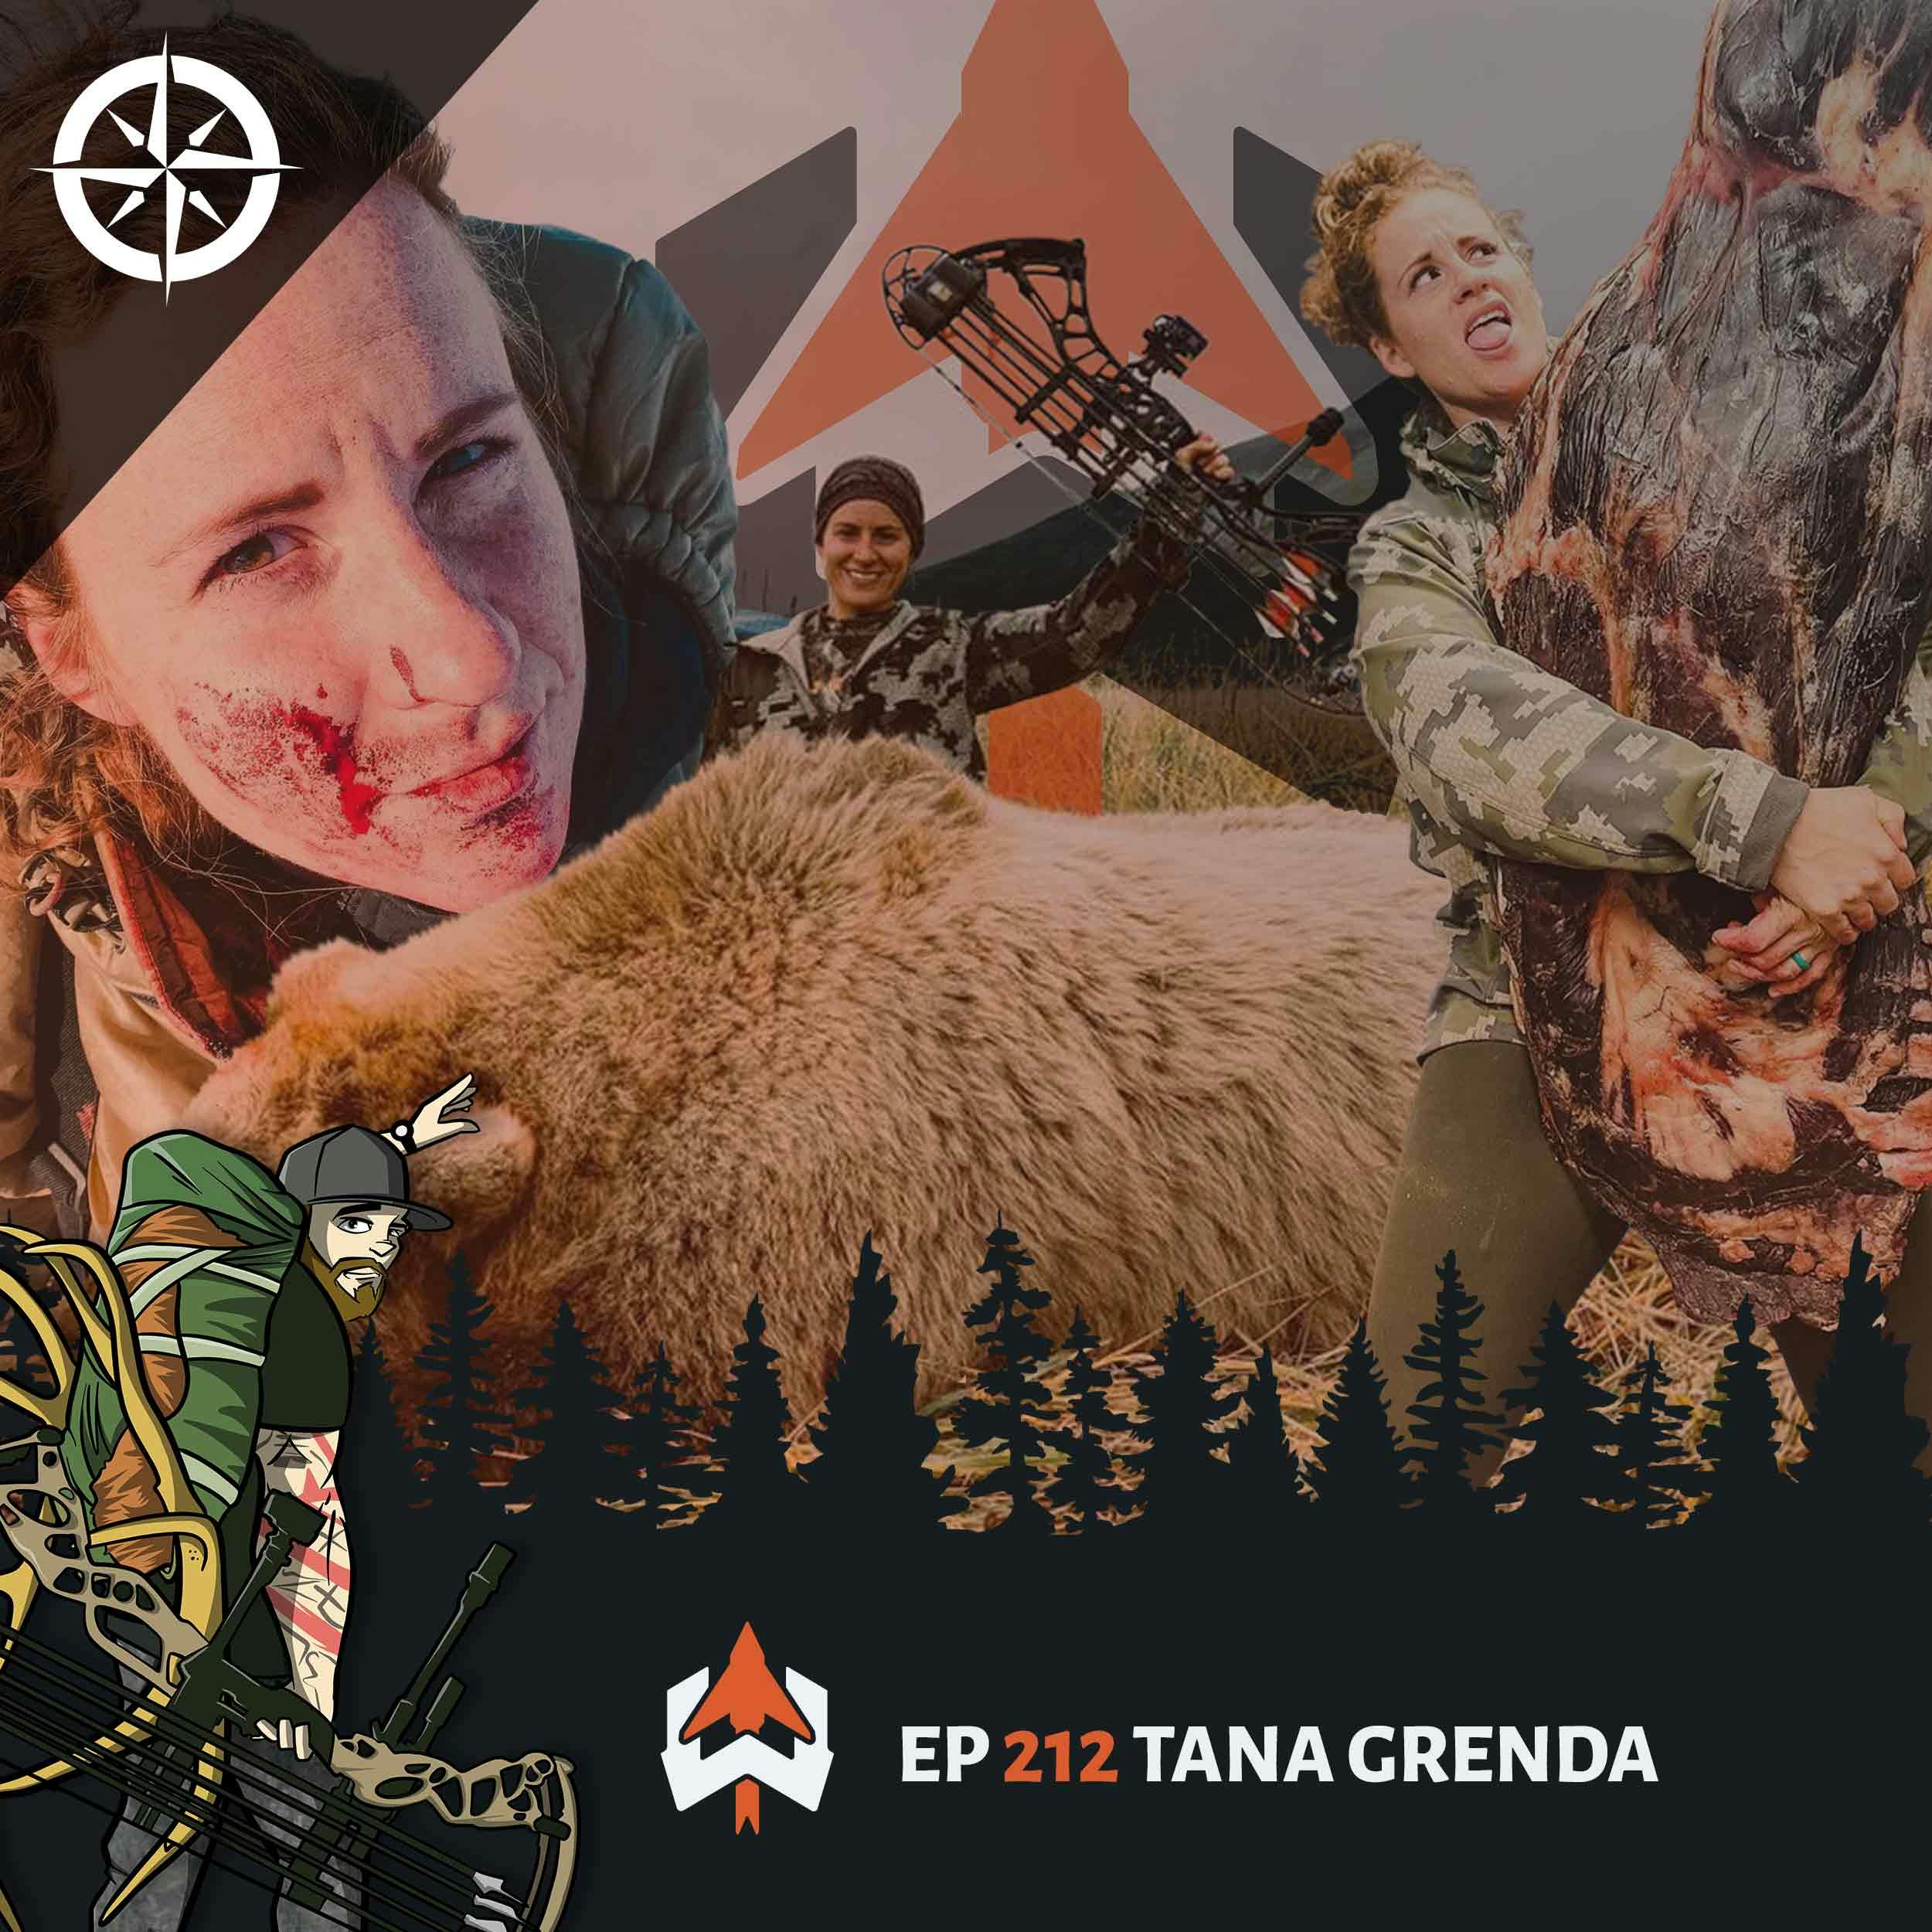 Ep 212 - Tana Grenda: Hunting Stories from the Last Frontier